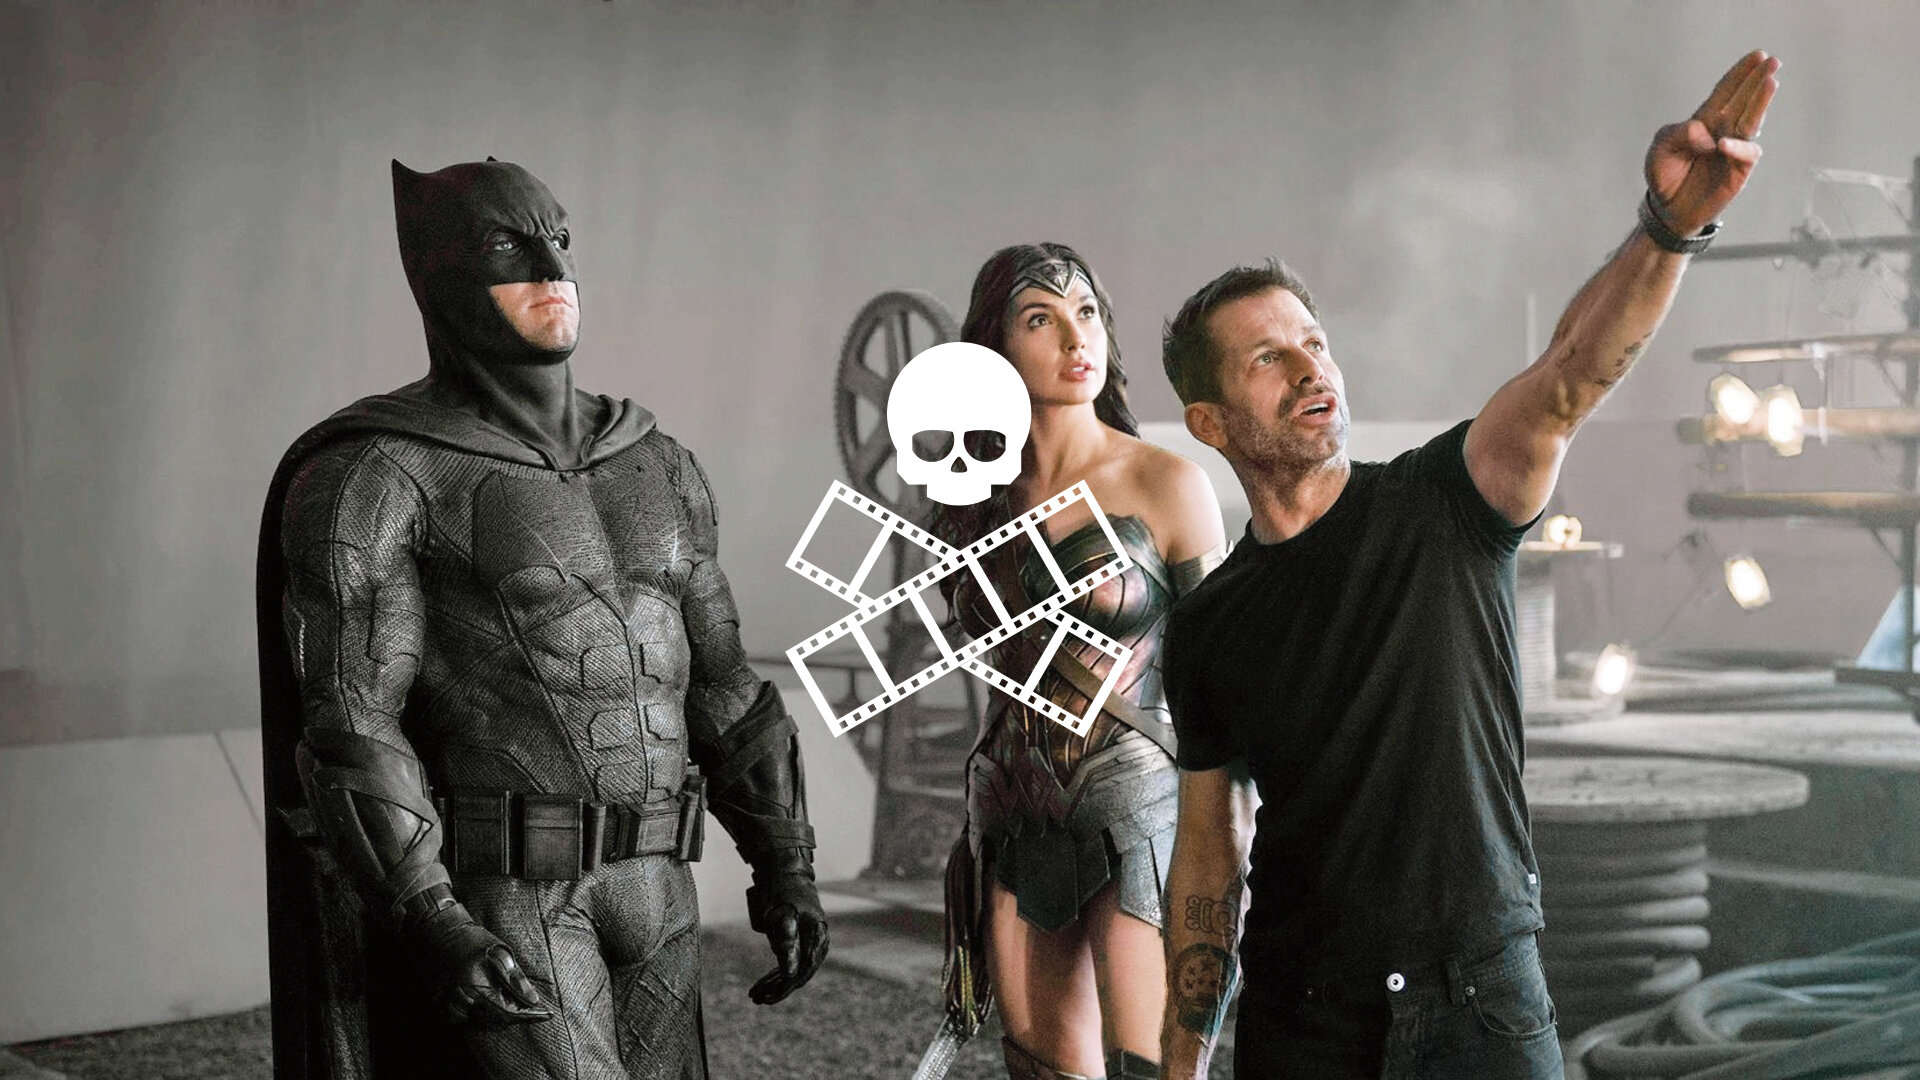 180. Zack Snyder's Justice League